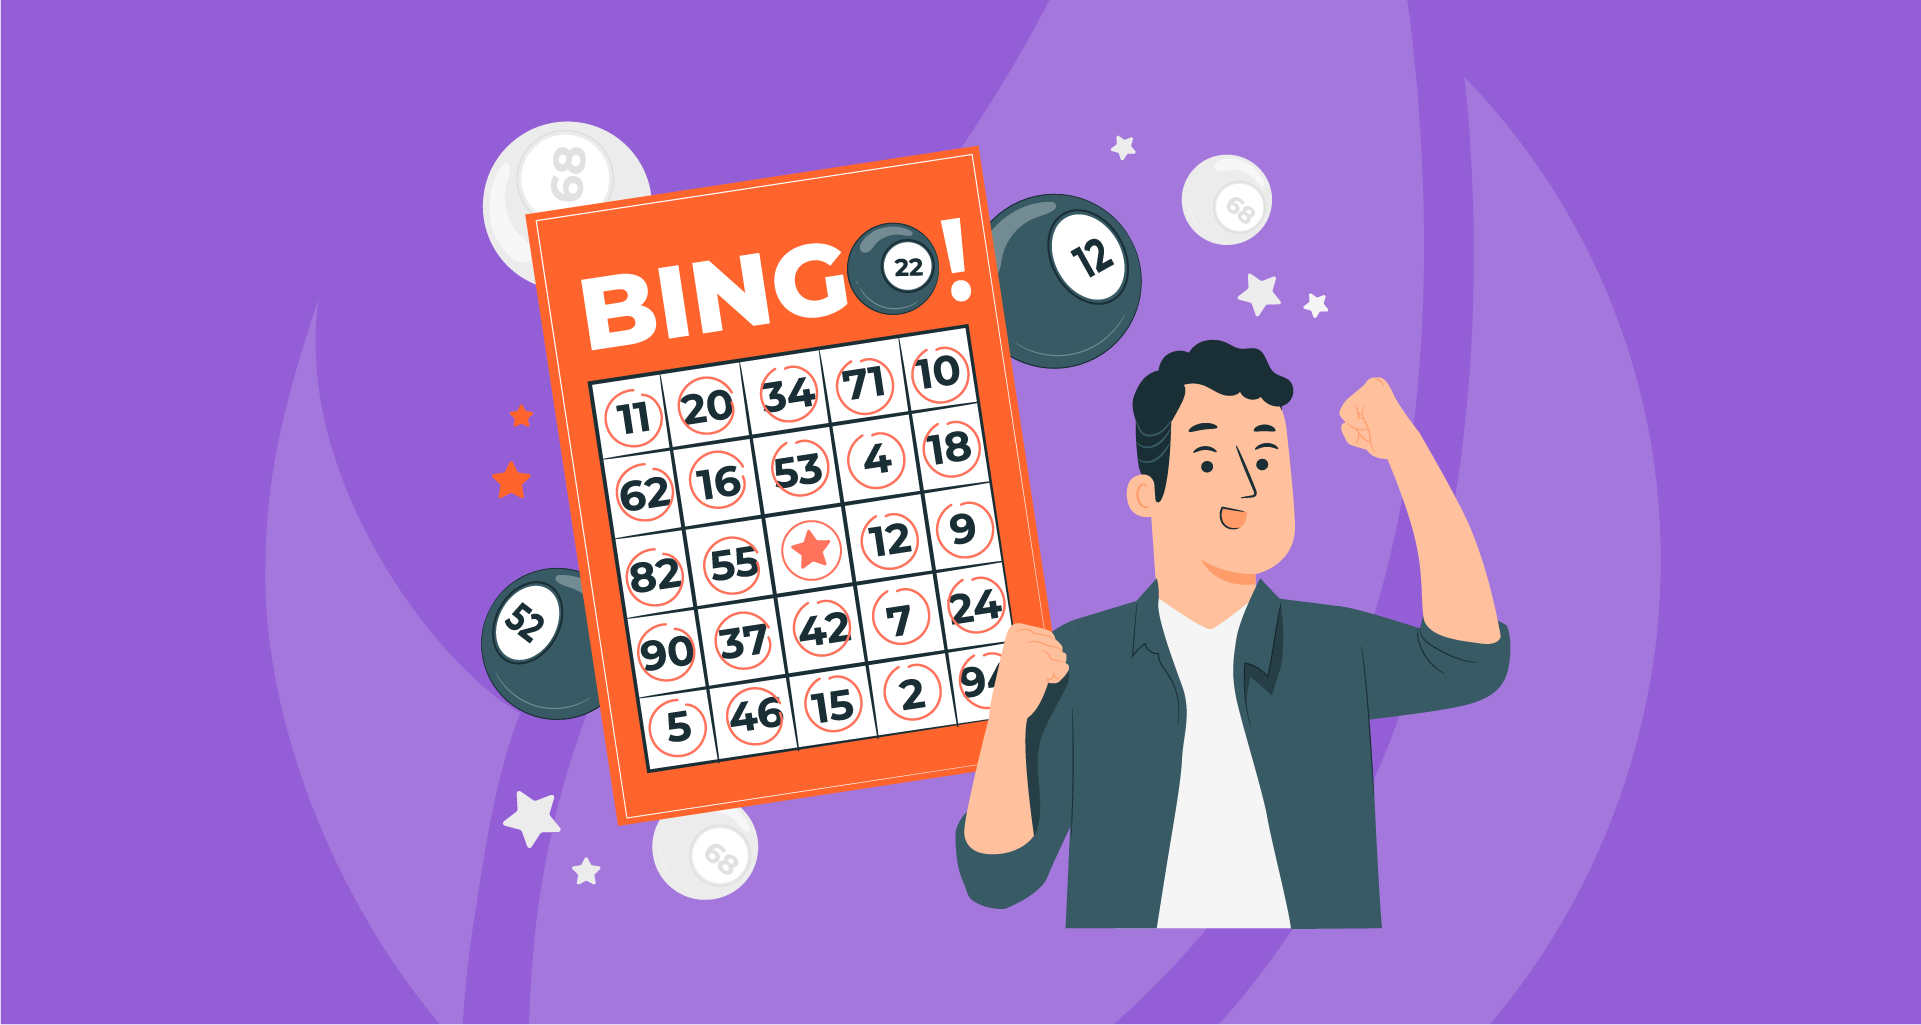 From Lipstick Holders to Taylor Swift: What We Didn’t Expect On Our 2024 Marketing Bingo Card.